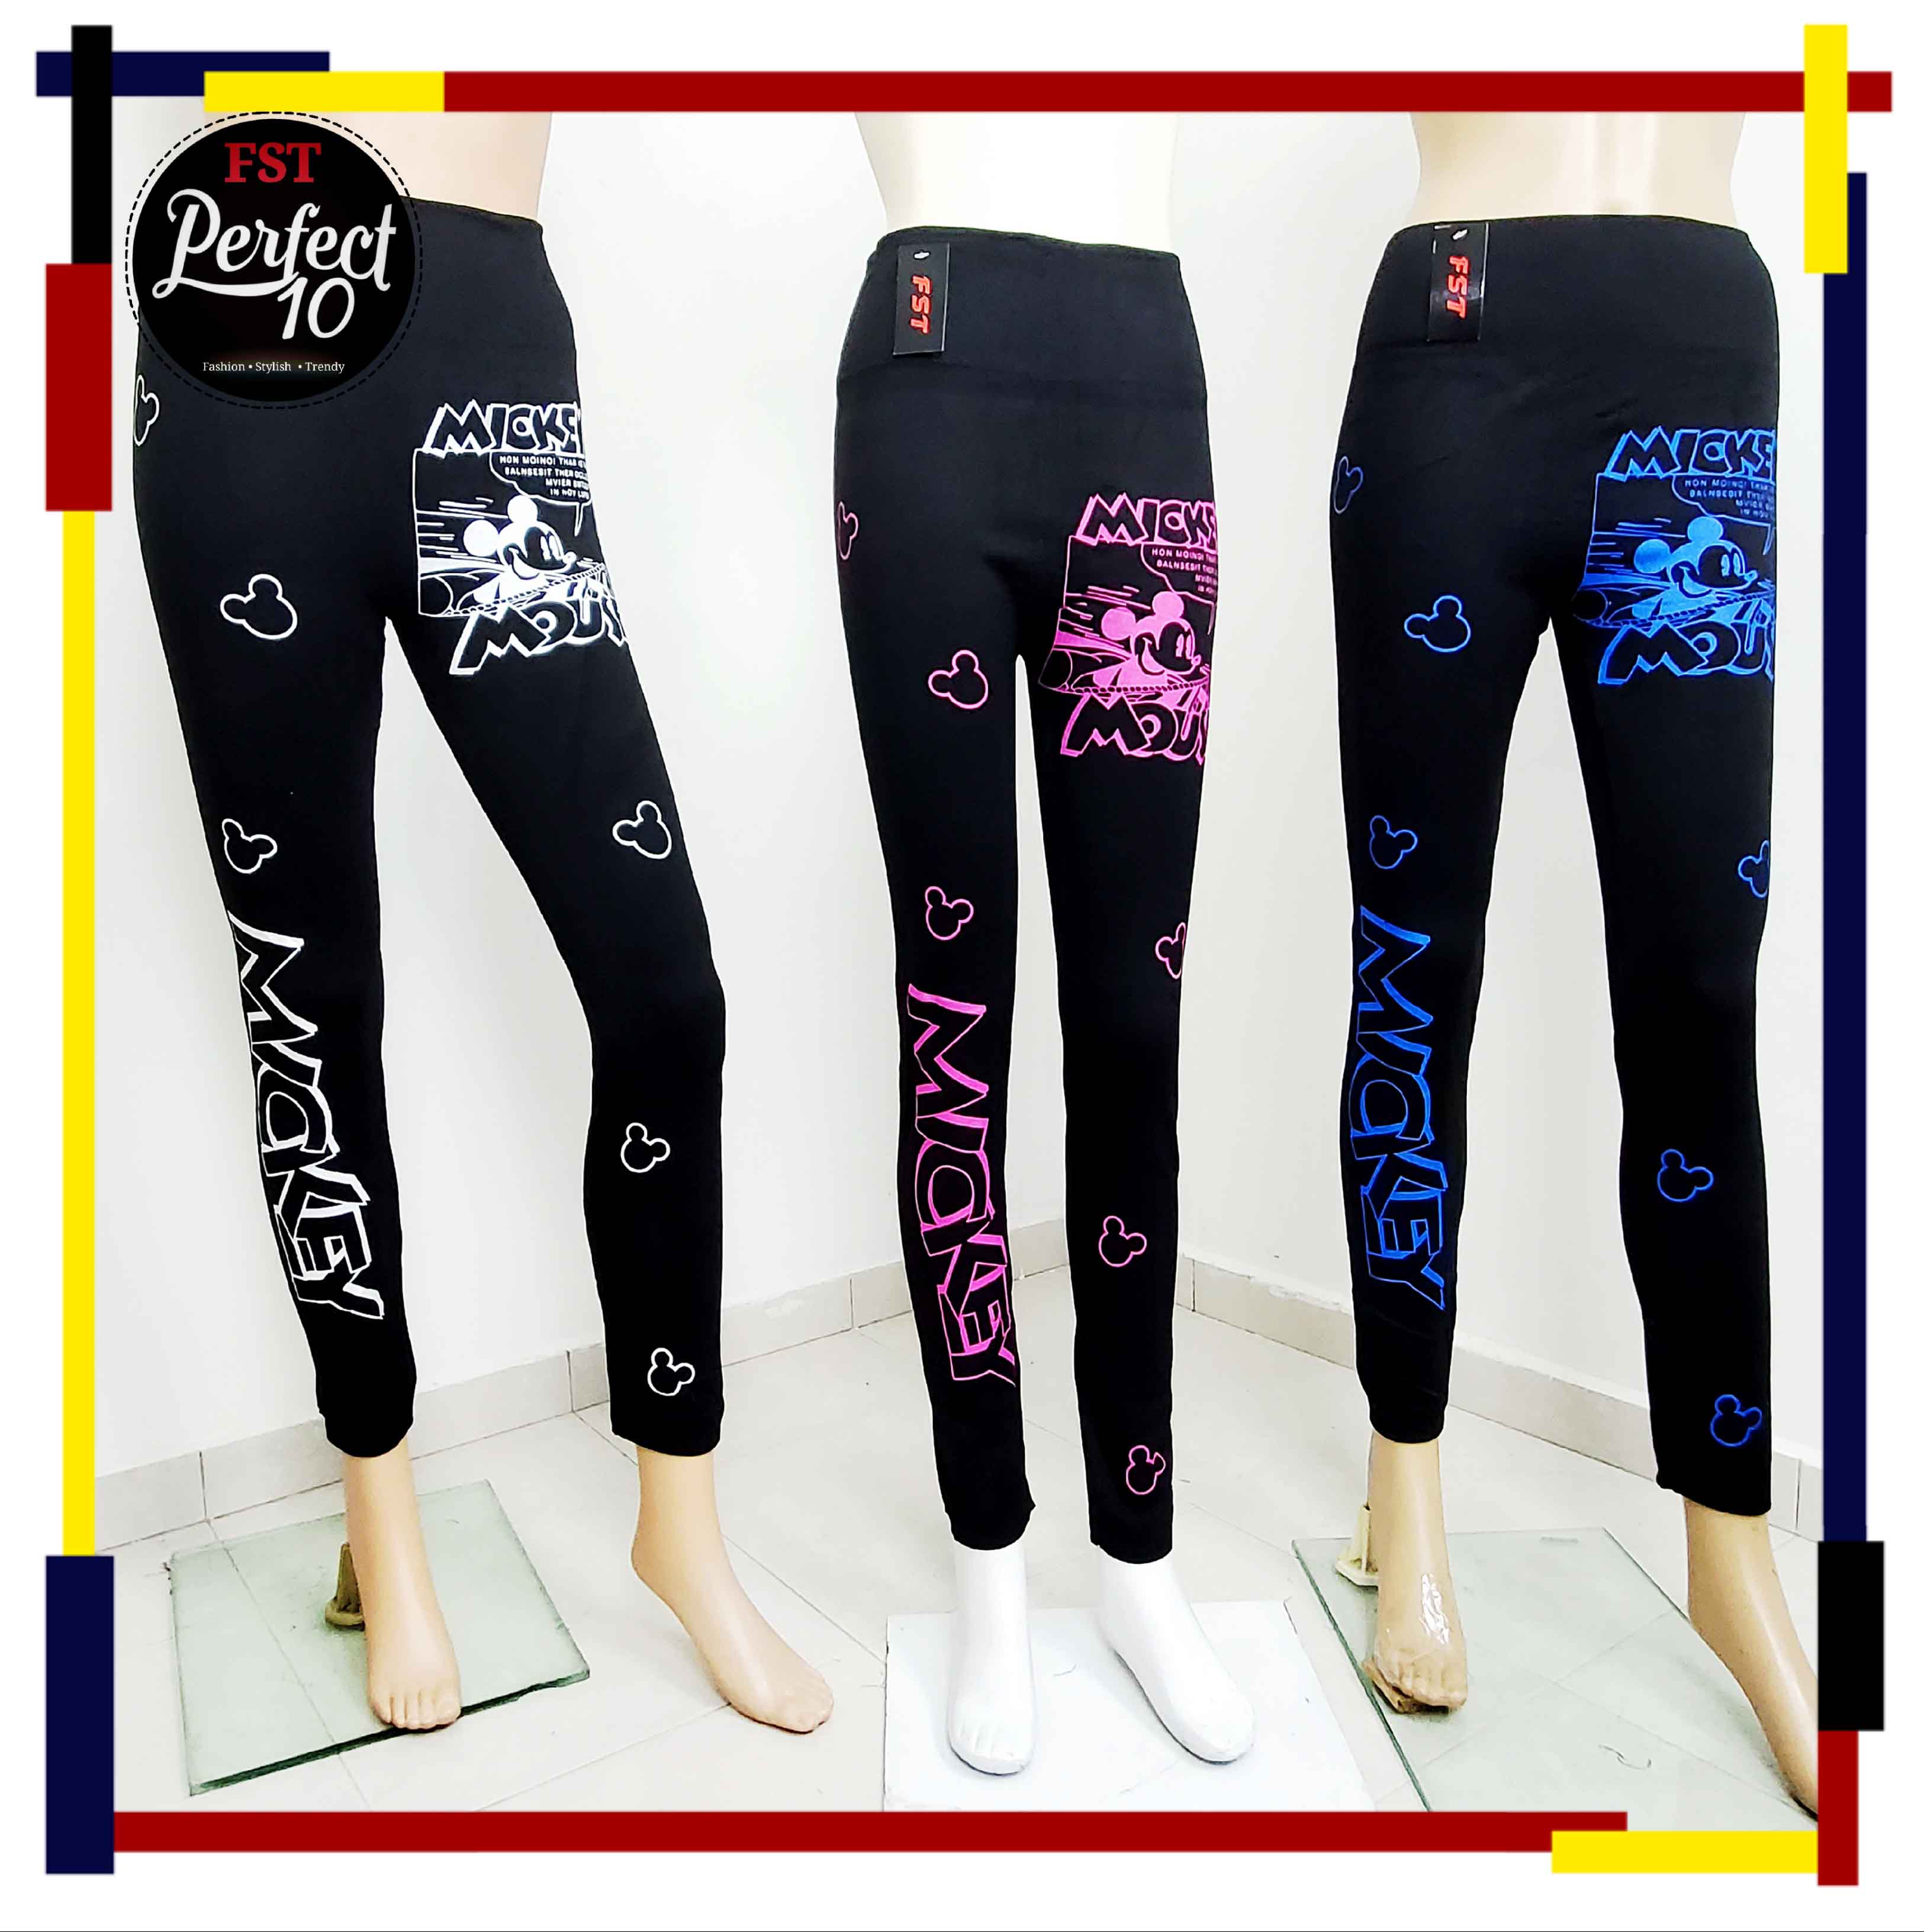 FST COTTON One Size Fit All Legging Pant [Mickey-12004]